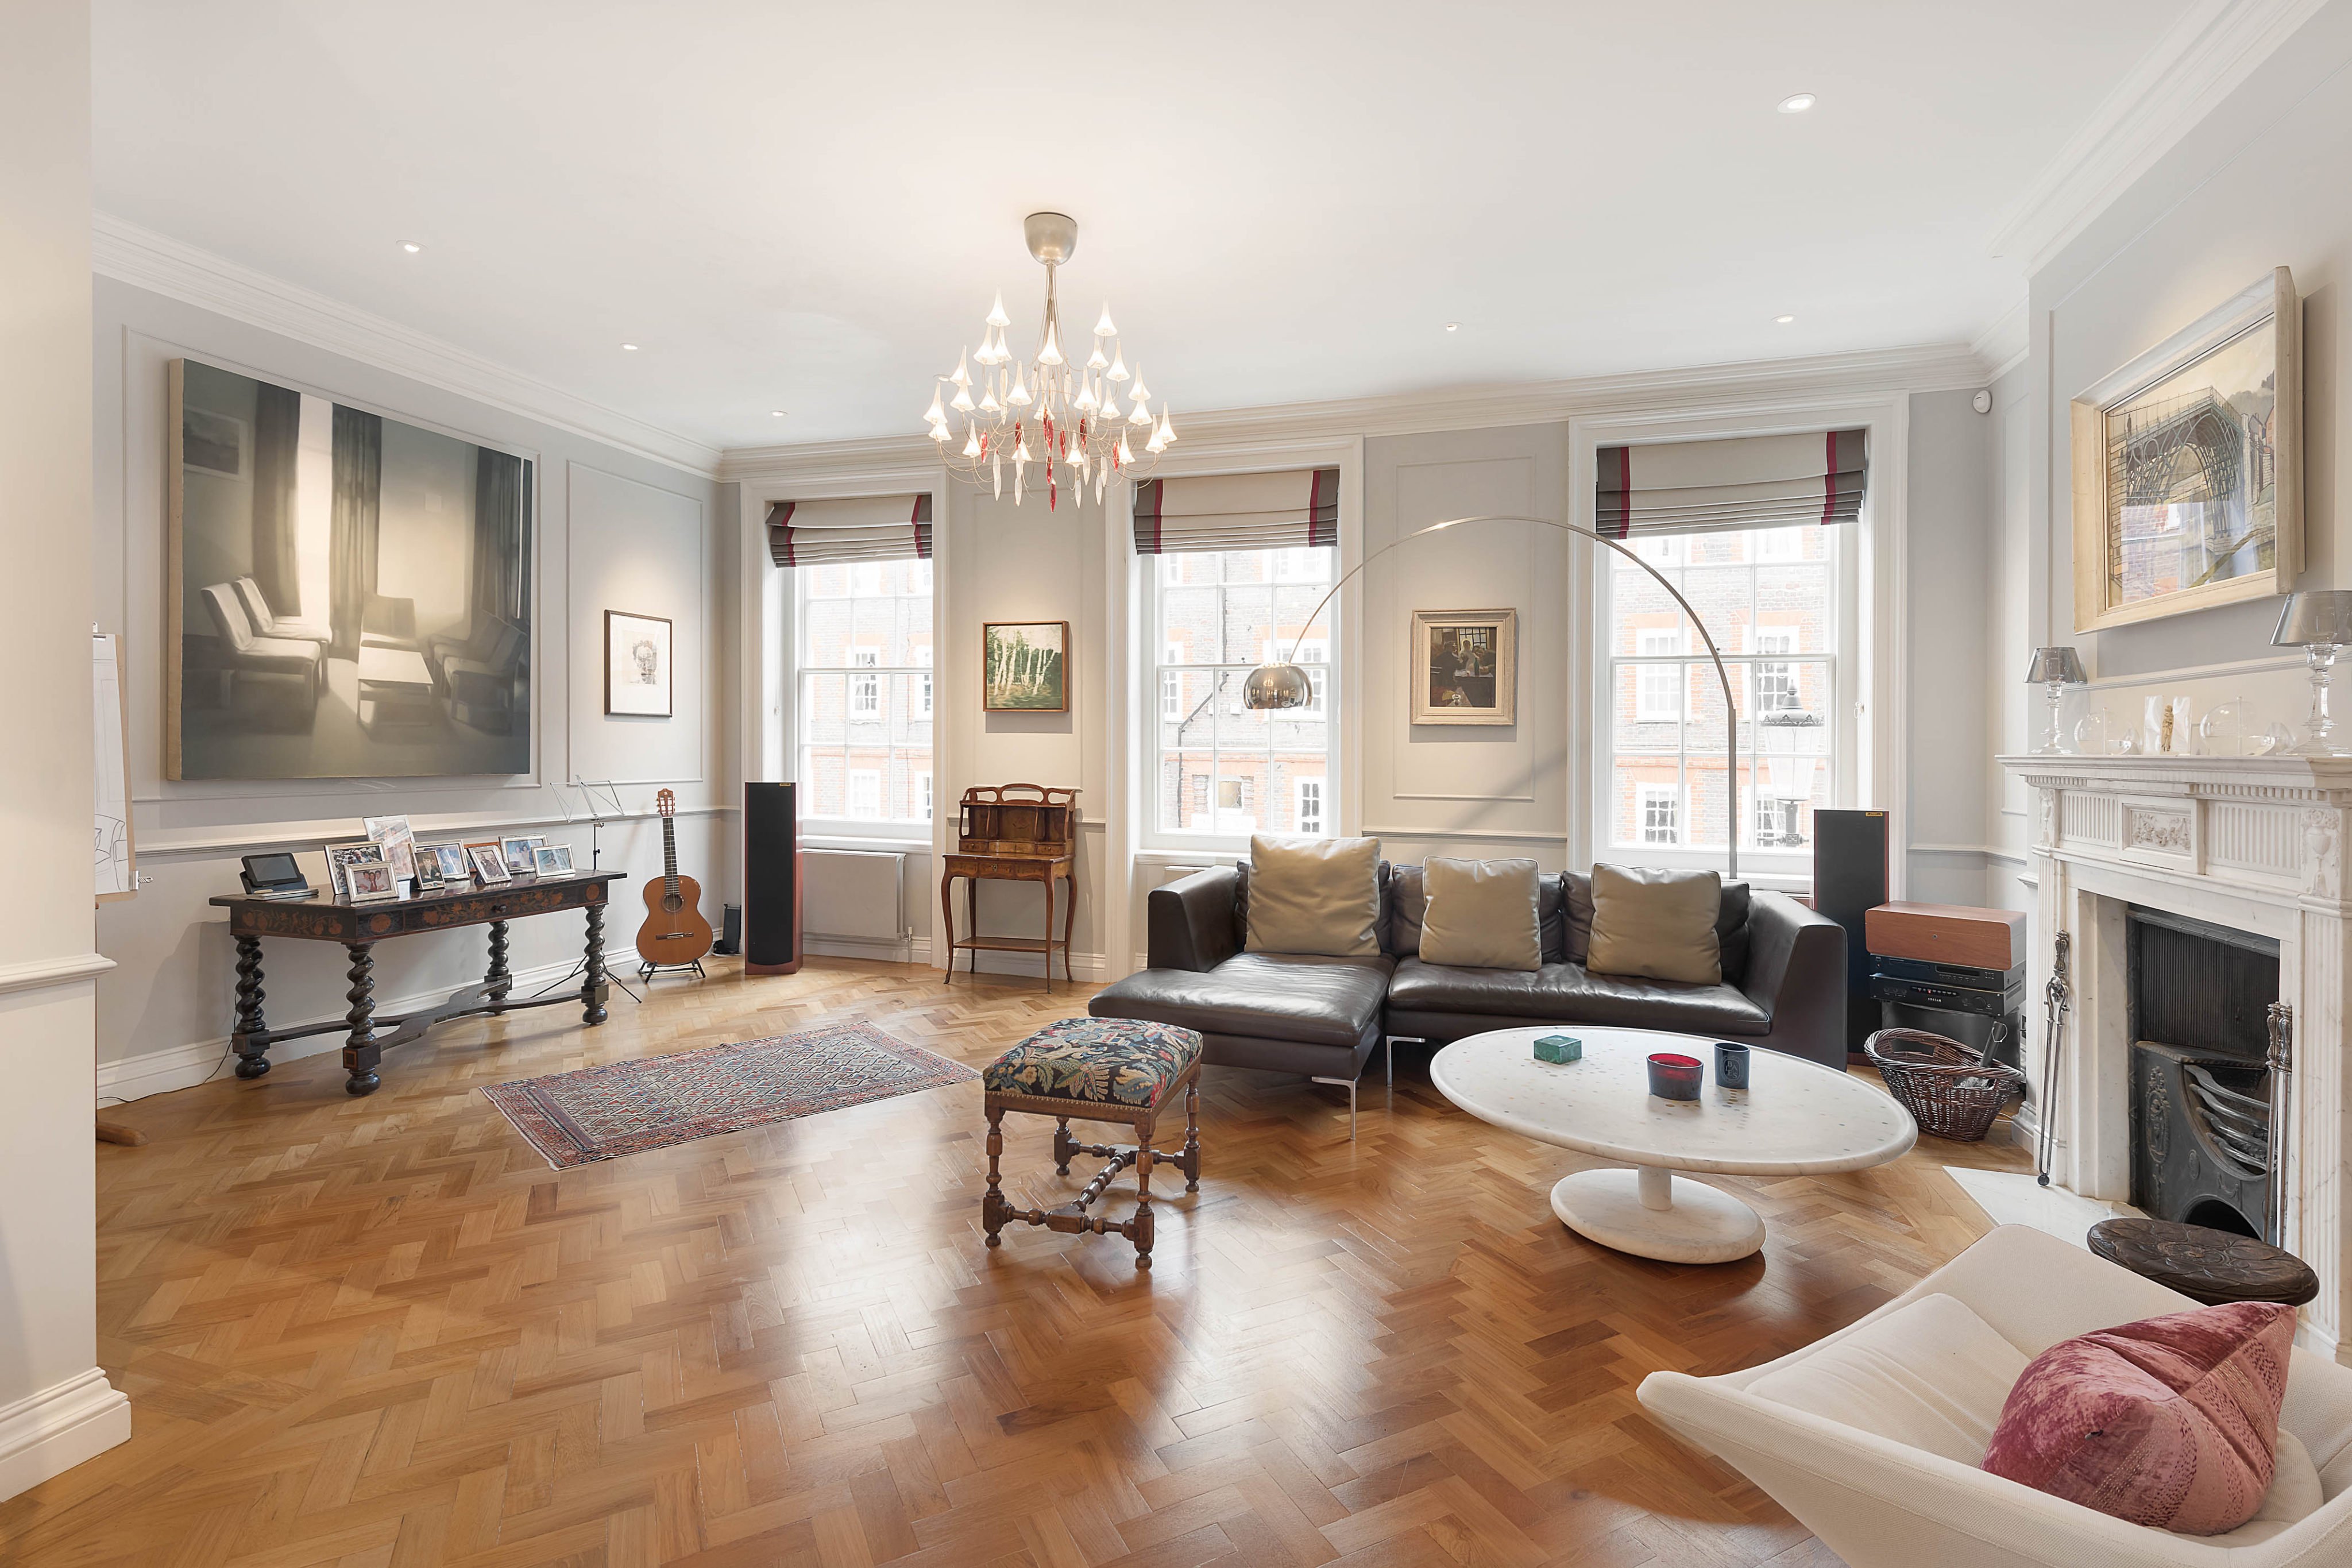 Mallord Street, Chelsea, London SW3: a 5-bedroom period home extensively
renovation in the last few years, for sale for £10,950,000/US $15,147,682.64. Photo:
Knight Frank